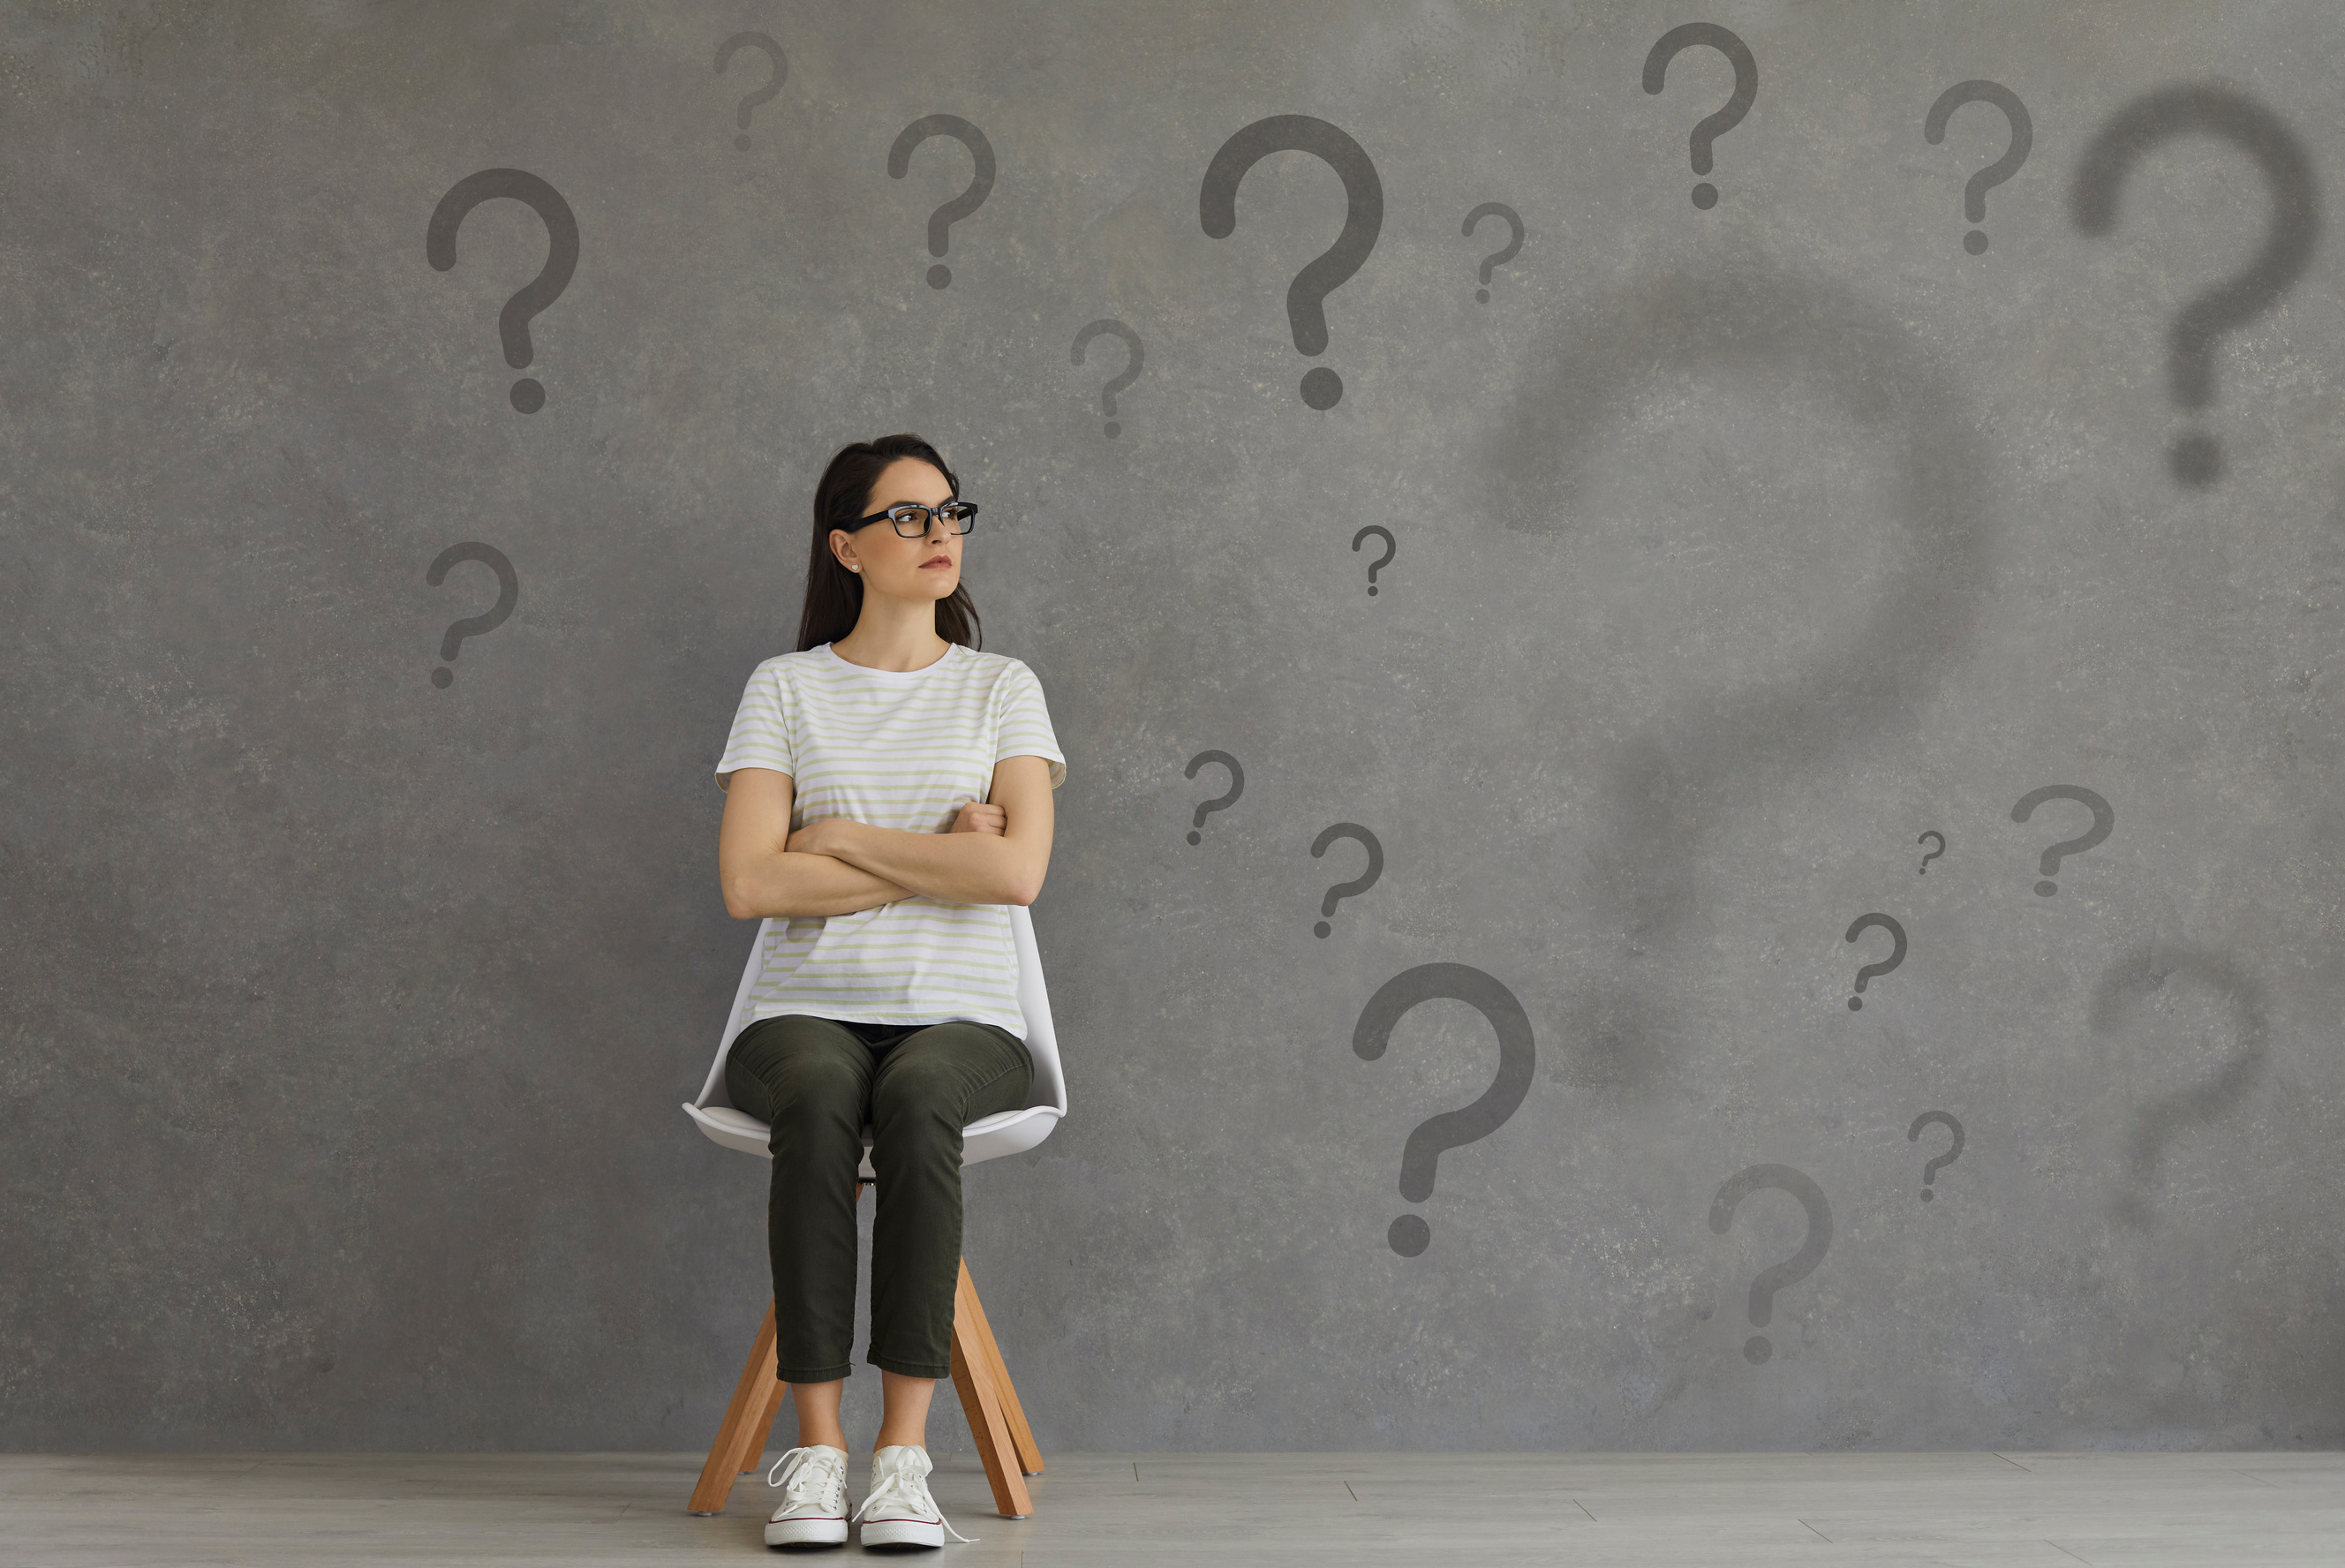 Confused Woman Sitting on Chair and Looking at Lots of Question Marks on Grey Background